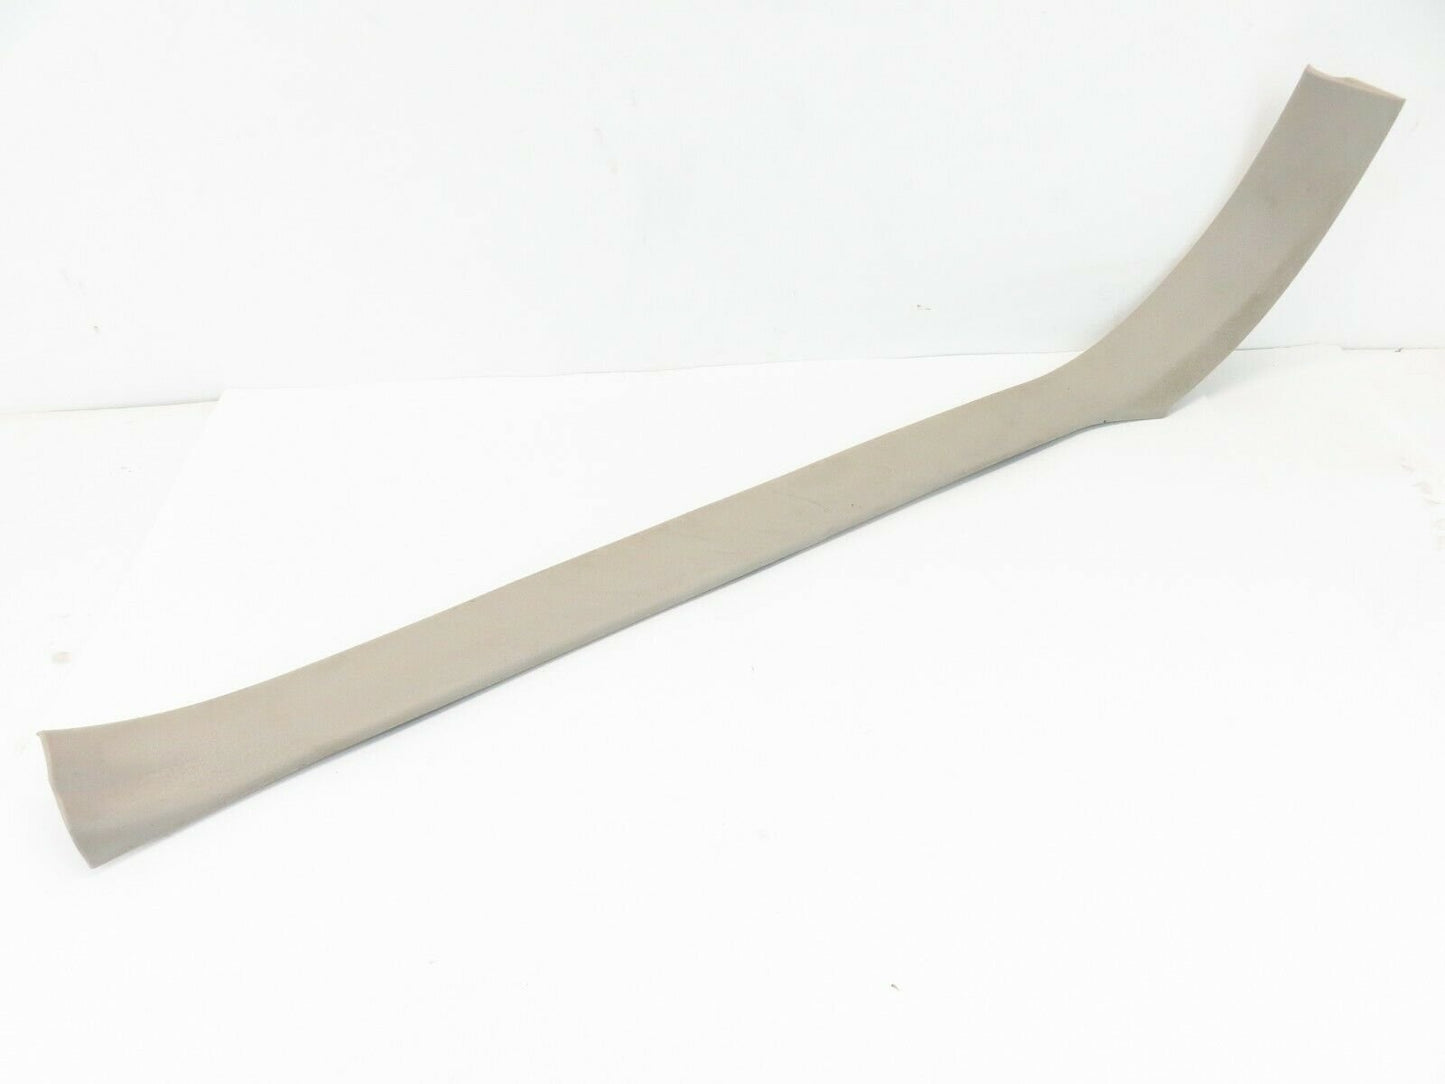 2010-2014 Subaru Legacy & Outback Driver Front Door Sill Retainer Trim LH 10-14